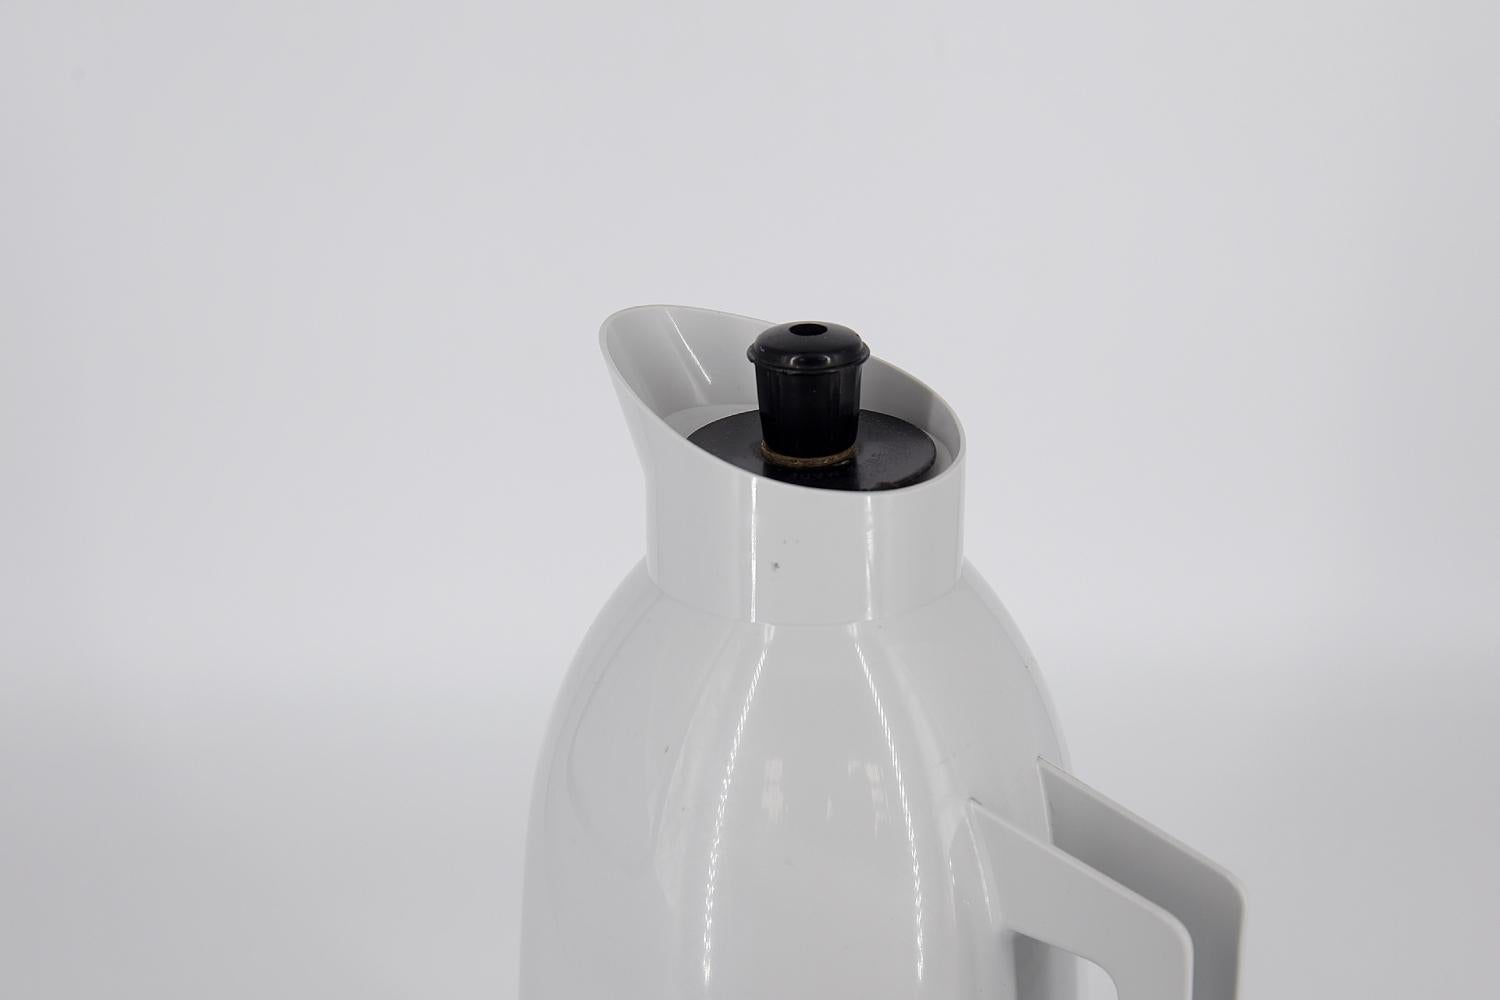 This thermal jug was designed by G. Rosendahl for the Swedish Falkenberg manufacture during the 1960s. Thermos flask made of white plastic with a black base. The convenient pouring inlet is designed so that nothing spills out while in use. The cork